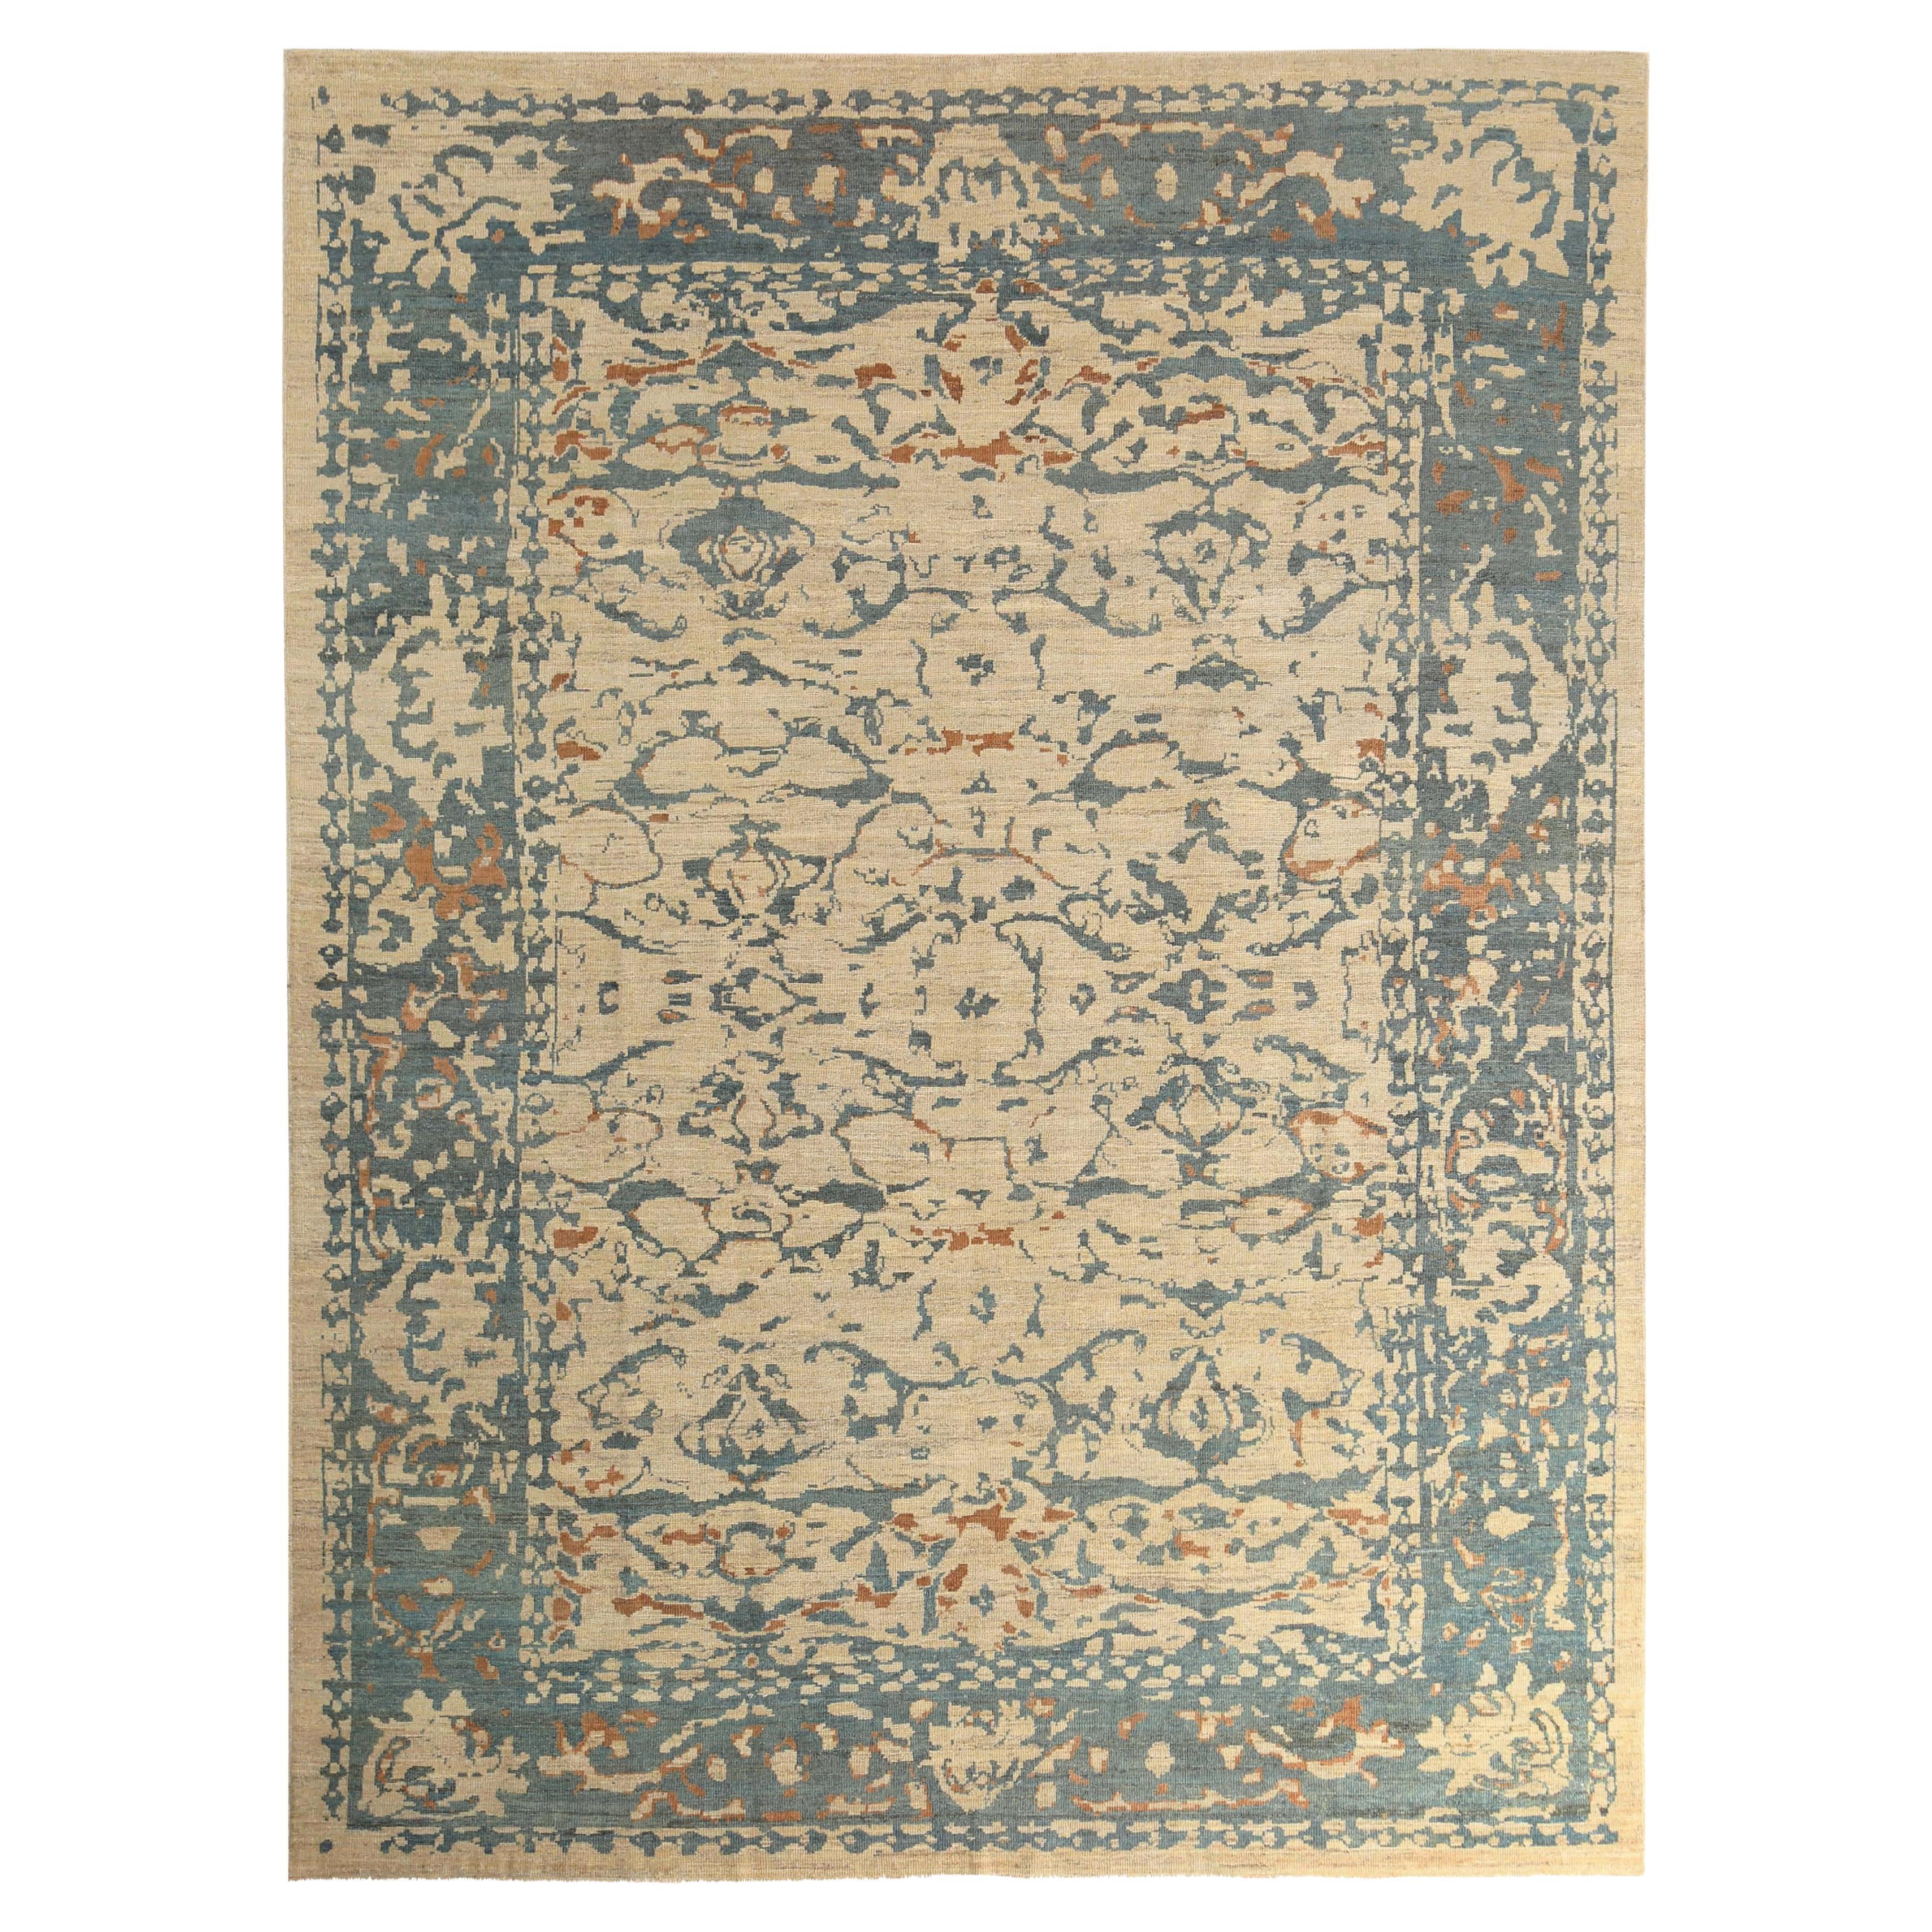 Handmade Turkish Sultanabad Rug - Modern Design with Blue, Green, and Orange Col For Sale